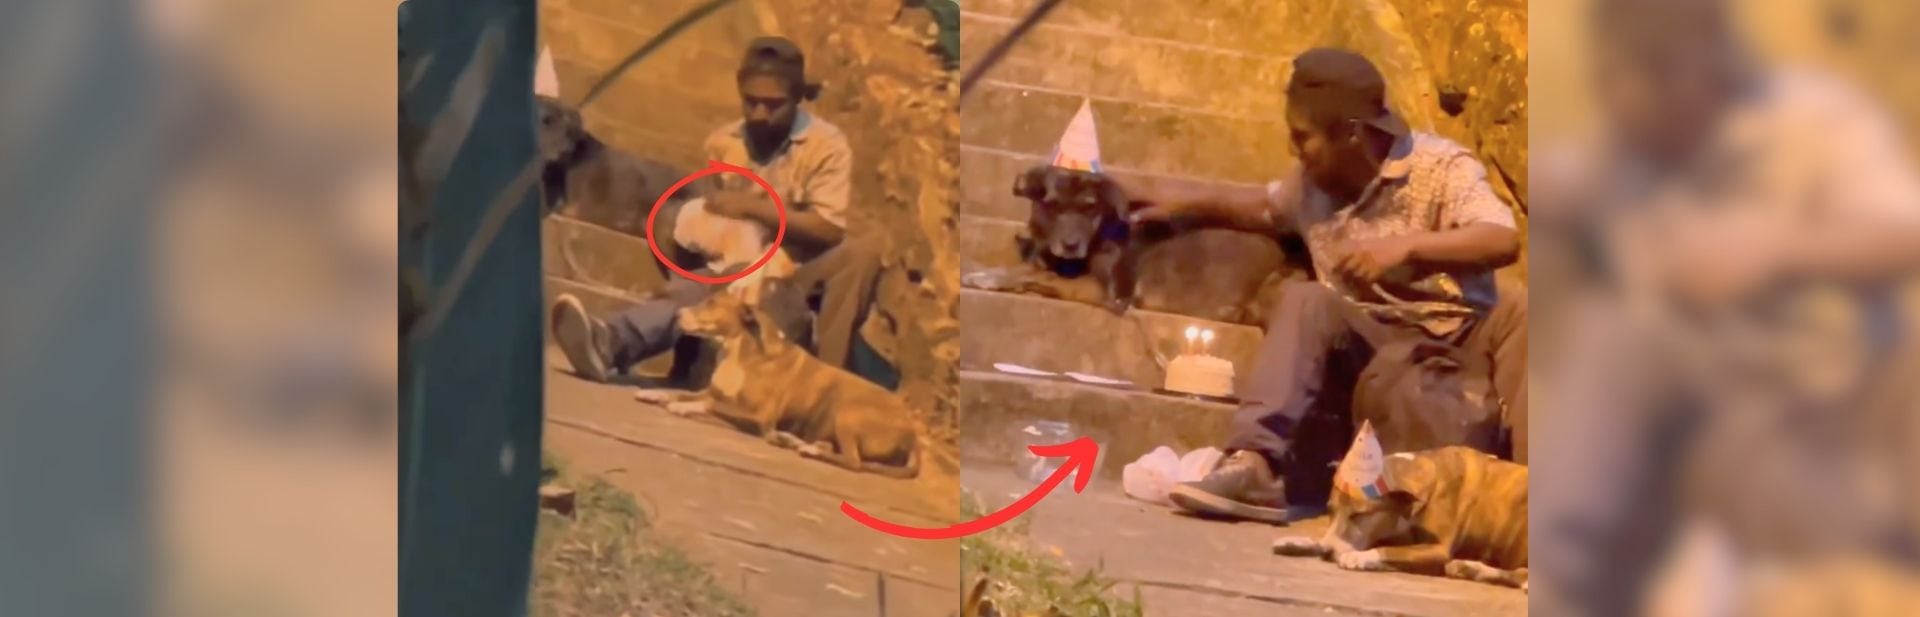 Homeless Man’s Tear-Jerking Birthday Surprise for His Beloved Dogs Goes Viral